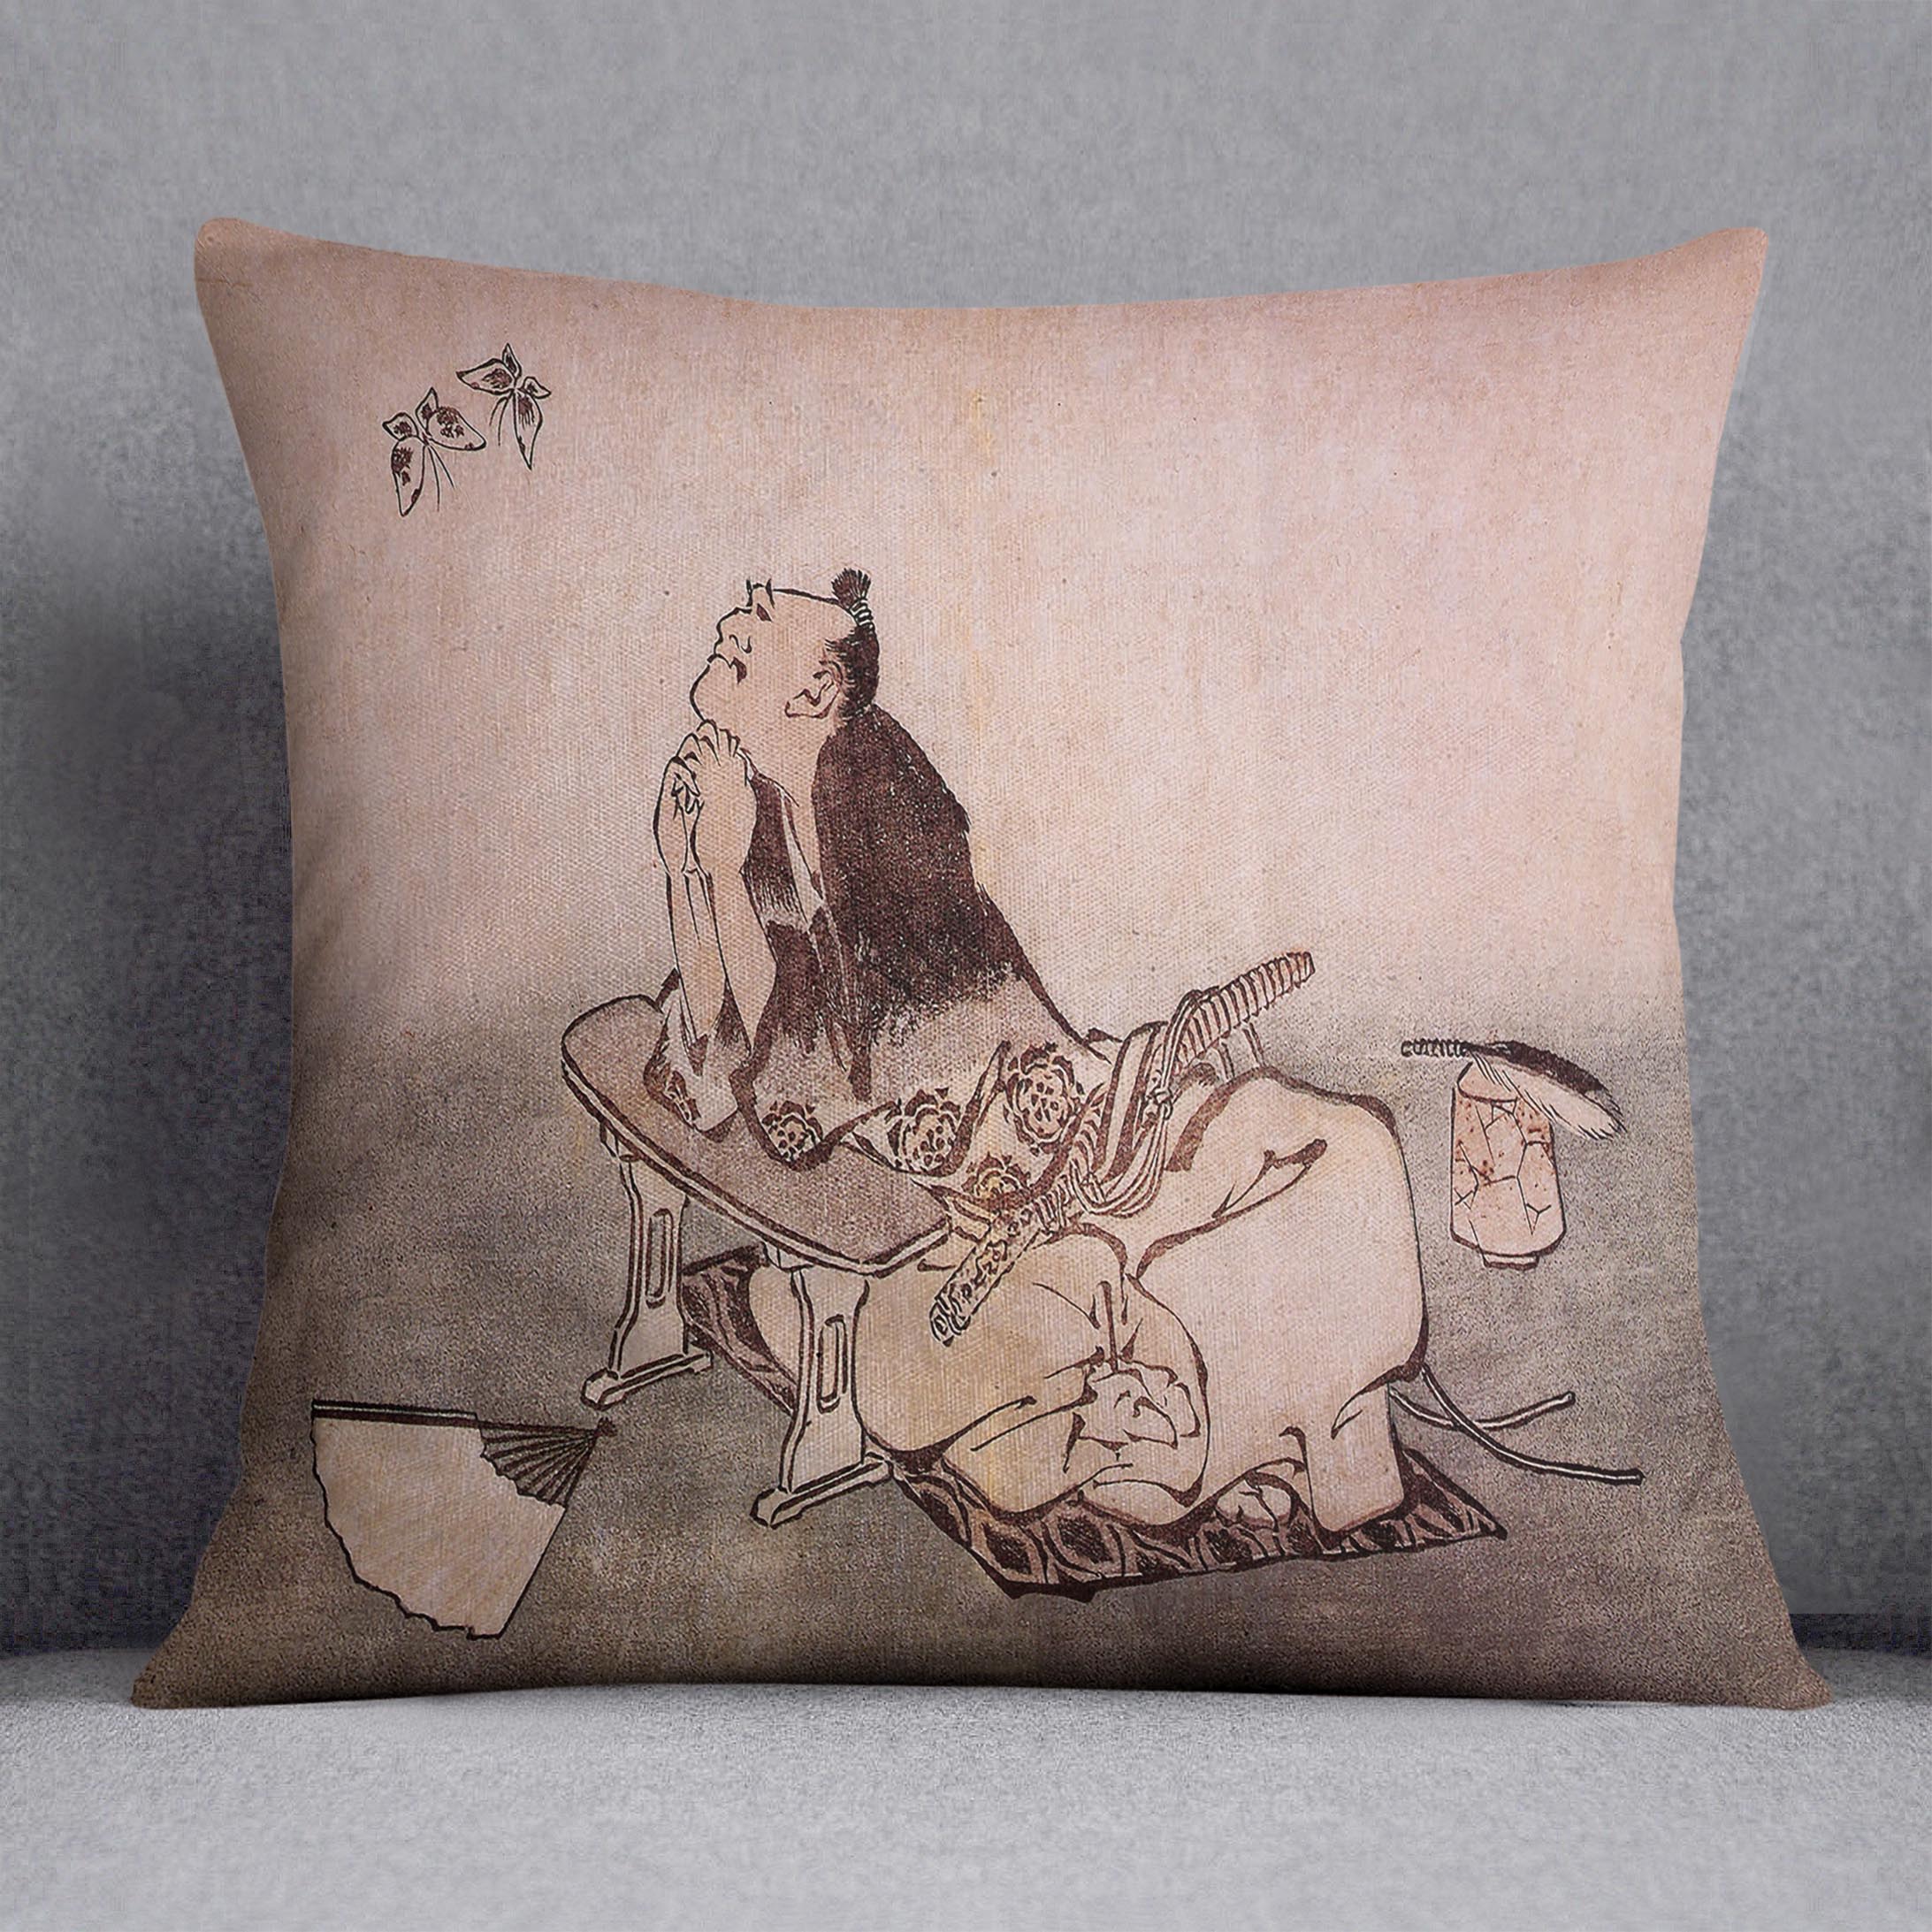 A Philospher looking at two butterflies by Hokusai Cushion